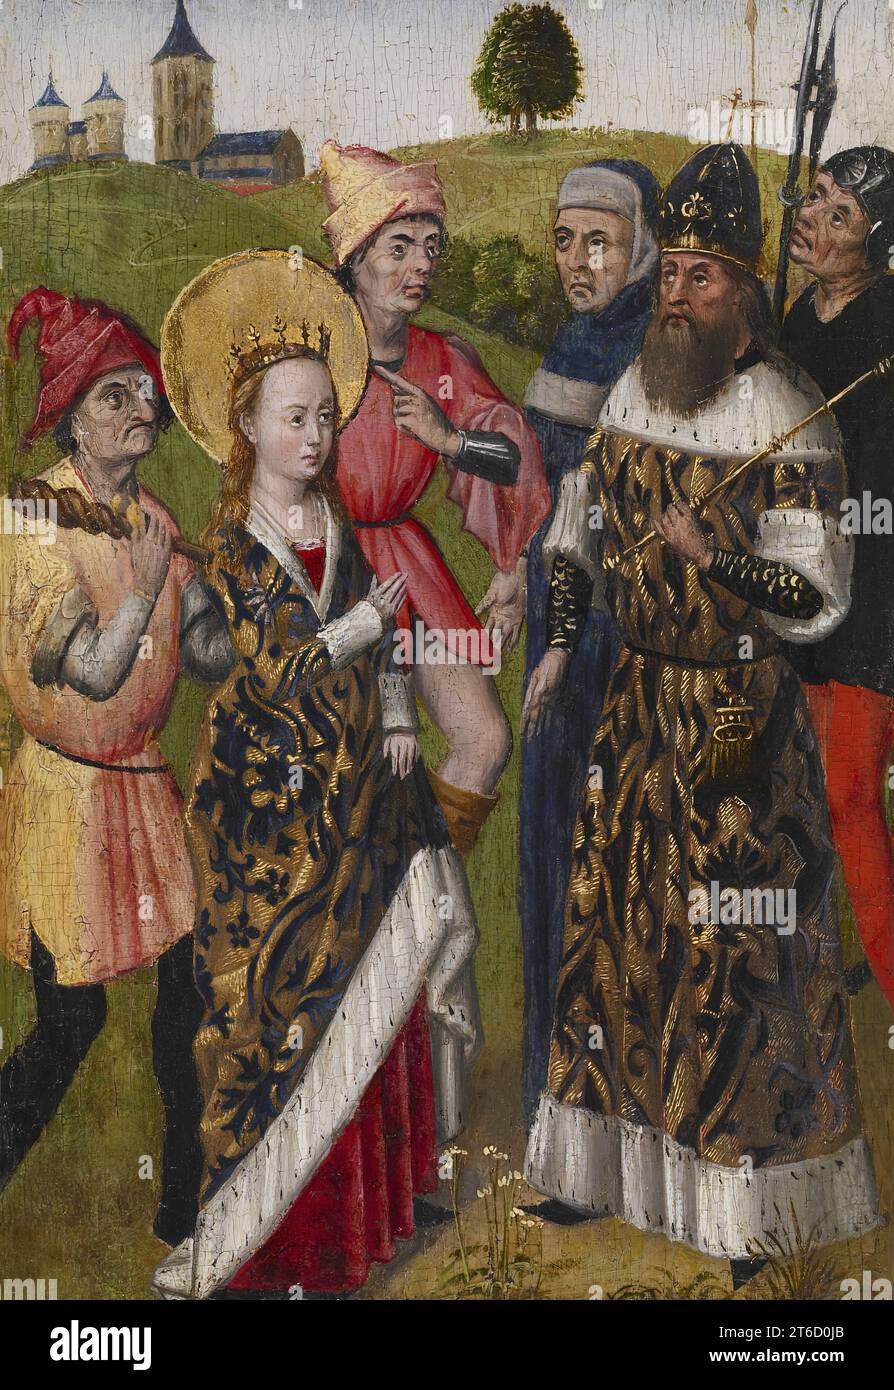 Saint Catherine Confronting the Emperor, c1480. Catherine of Alexandria was one of the most popular saints in medieval western Europe. Legend describes her as a wise and beautiful virgin of noble birth who was executed for being a Christian. This image and its two associated panels show Catherine confronting the Roman emperor, converting the learned pagans who were supposed to disprove her Christian beliefs, and, with the help of the Holy Spirit, confounding a second group of scholars sent to visit her in prison. The panels were once part of an altarpiece recounting the entire story of Catheri Stock Photo